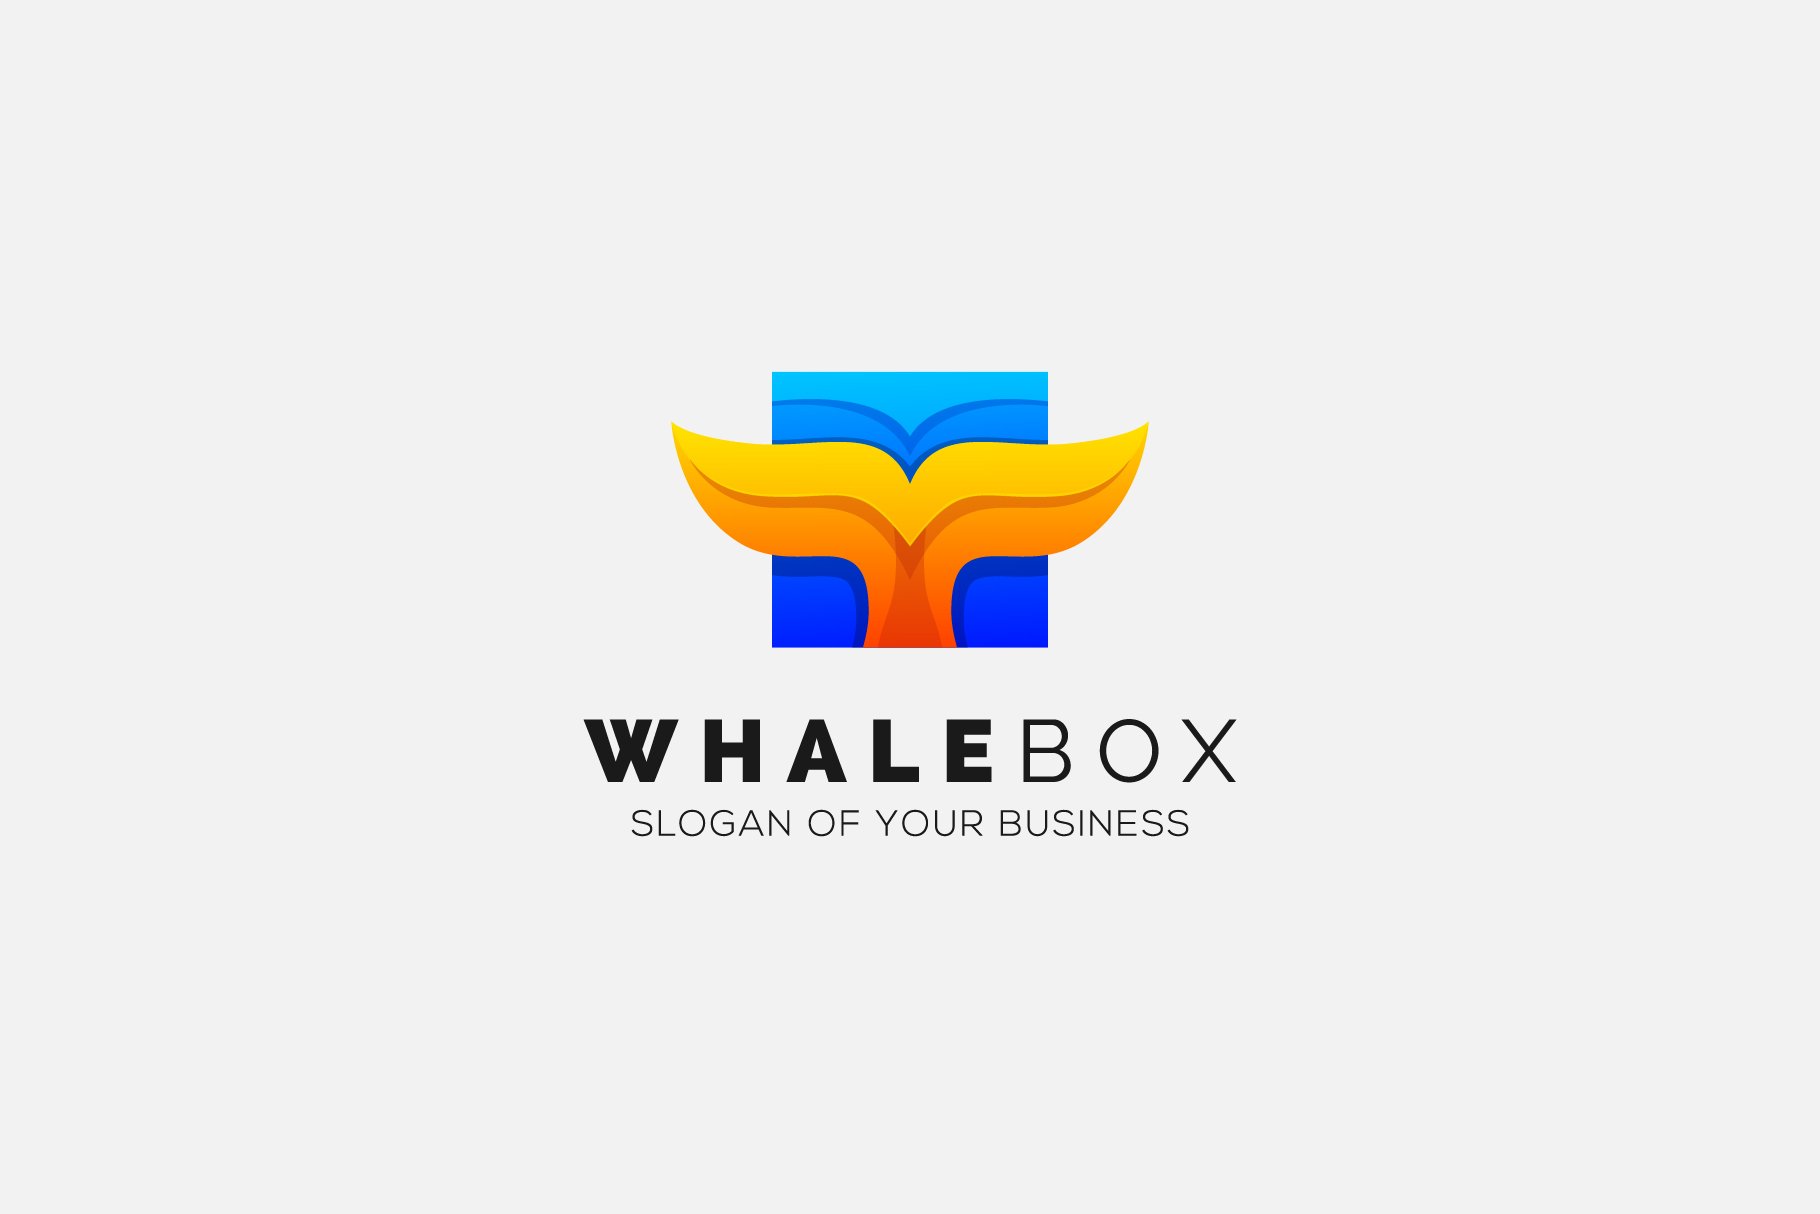 Gradient Cube Box Hexagon with Whale cover image.